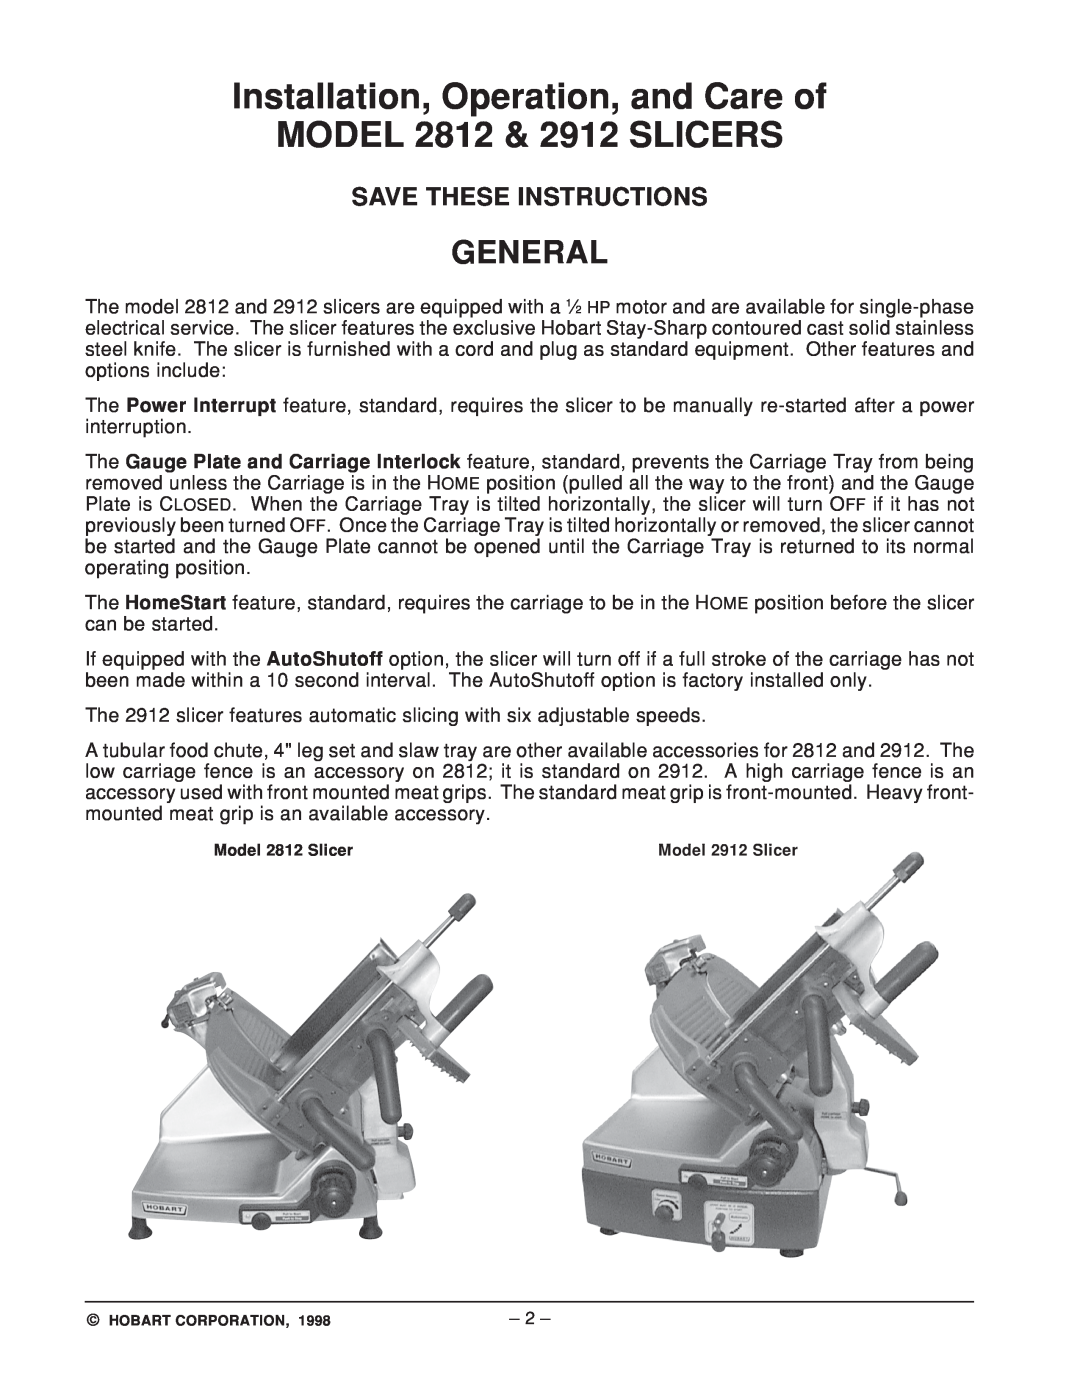 Hobart 2912 ML-104963 General, Installation, Operation, and Care of MODEL 2812 & 2912 SLICERS, Save These Instructions 